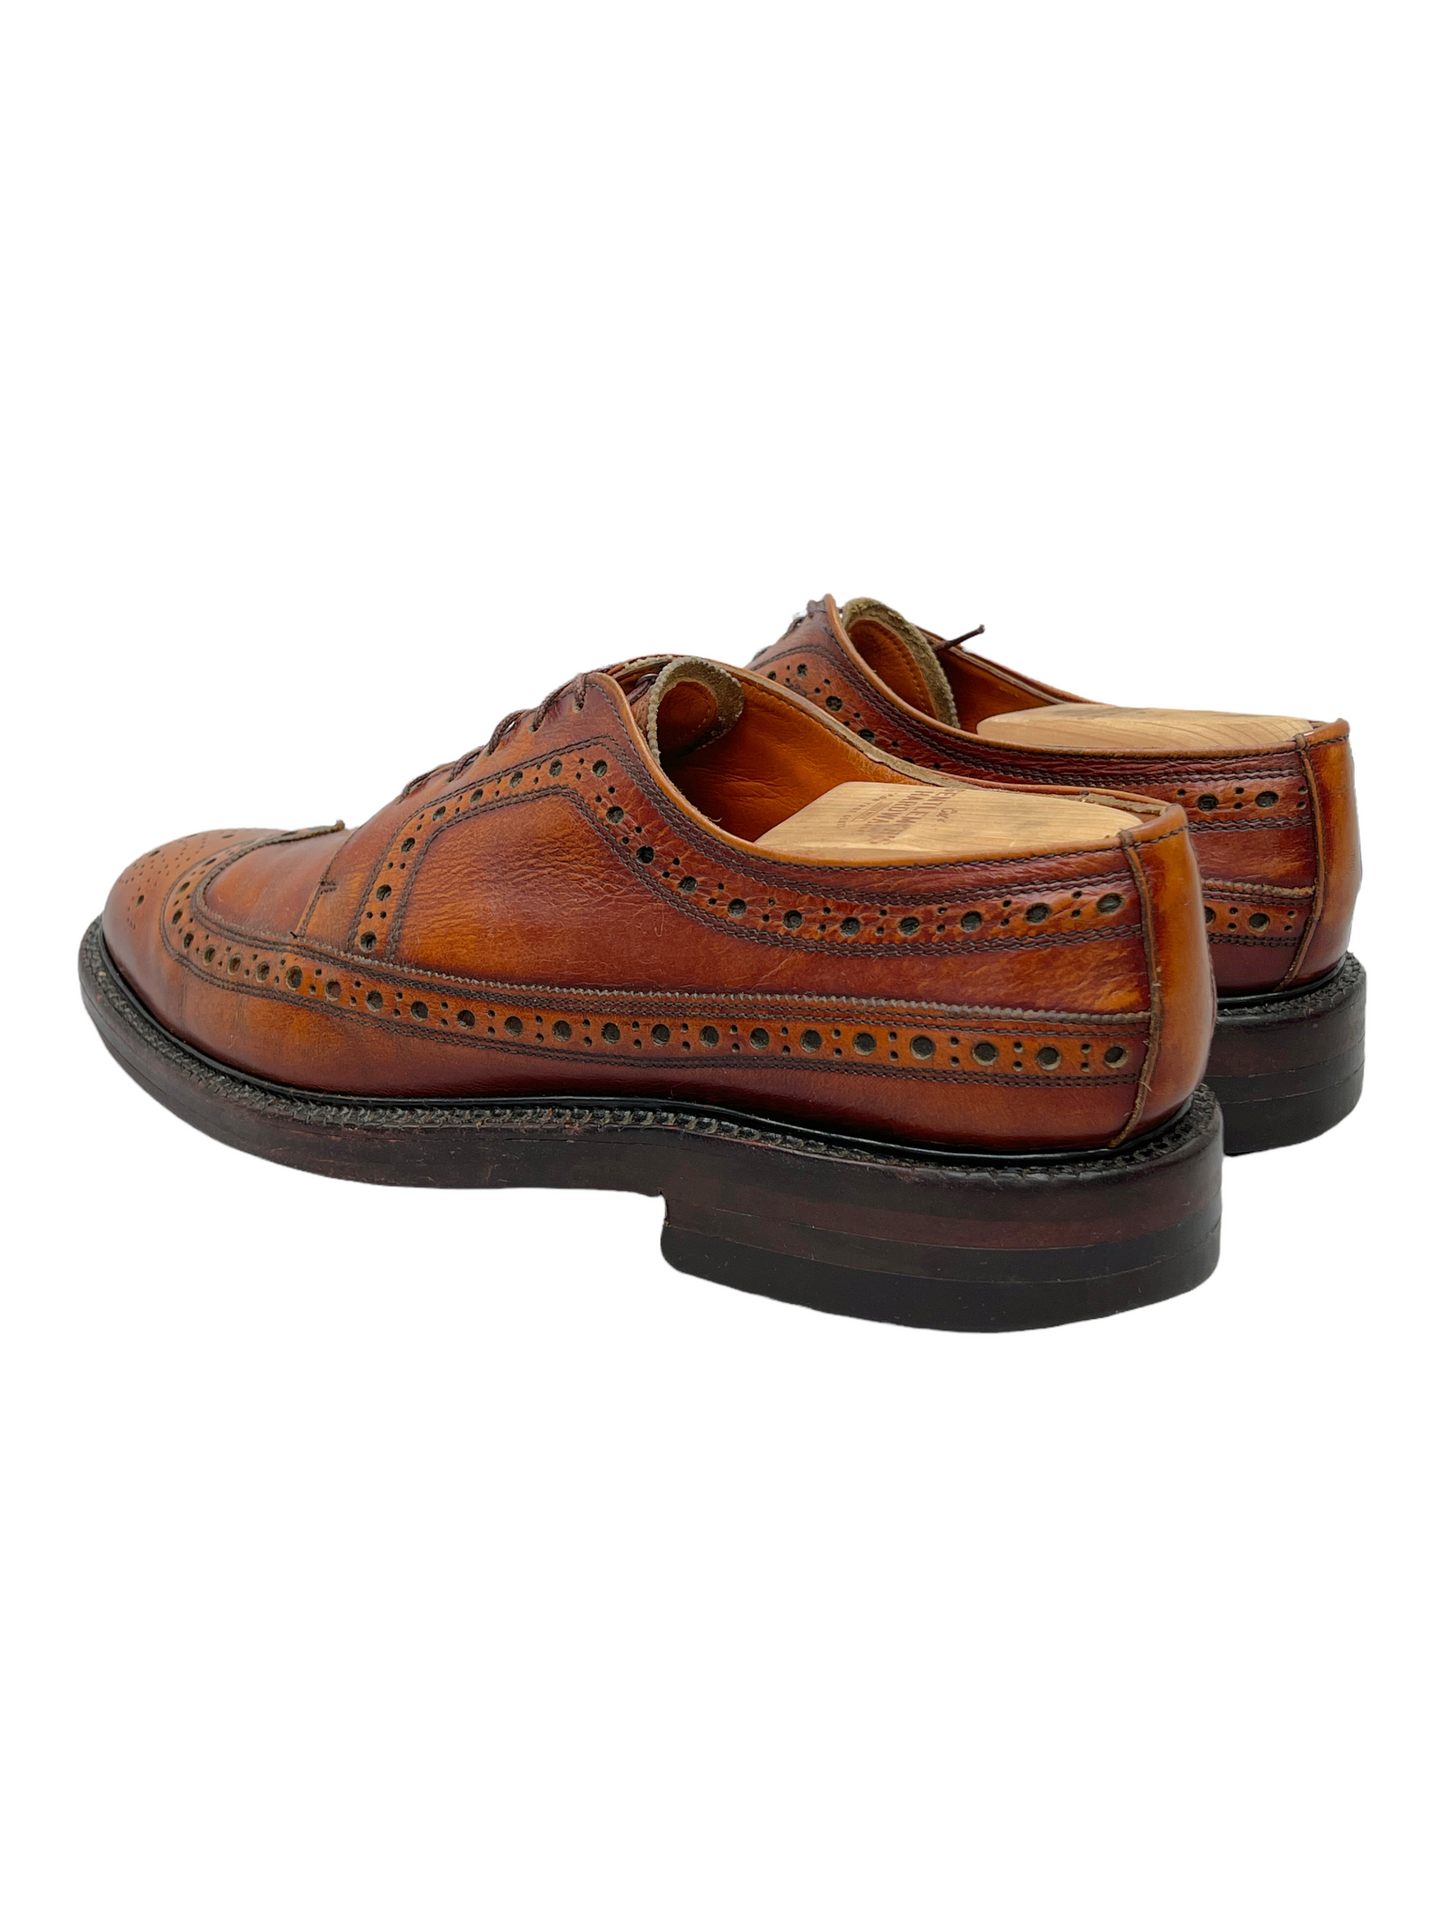 Florsheim Imperial Collection Brown Leather Oxford Dress Shoe 8 D US — Genuine Design luxury consignment Calgary, Canada New & pre-owned clothing, shoes, accessories.